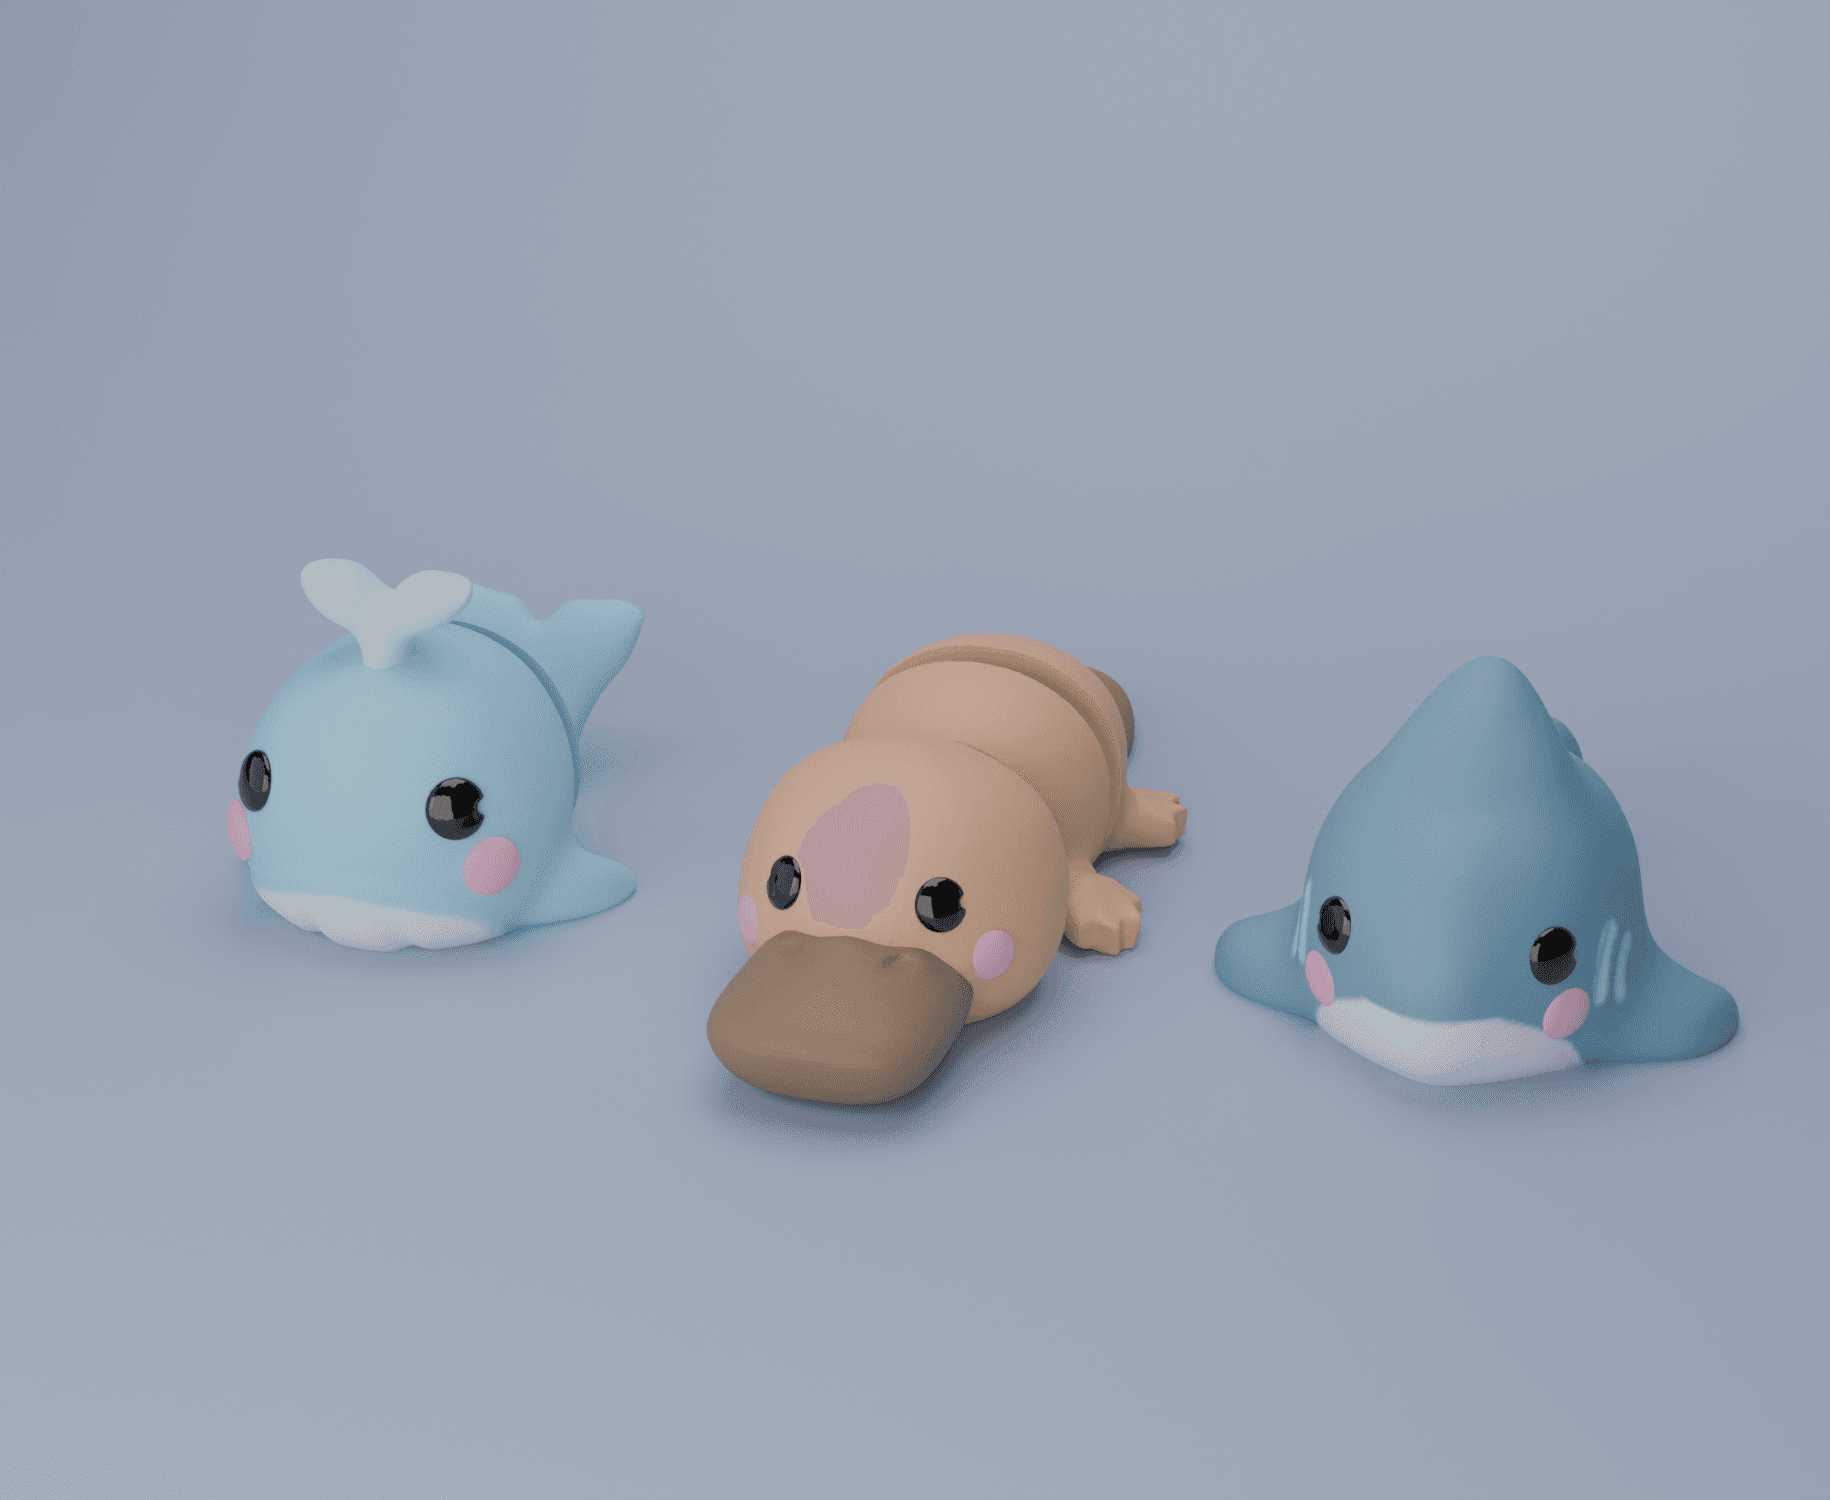 Cute 3D Whale, Platypus, Shark Flexi Keychains are coming!